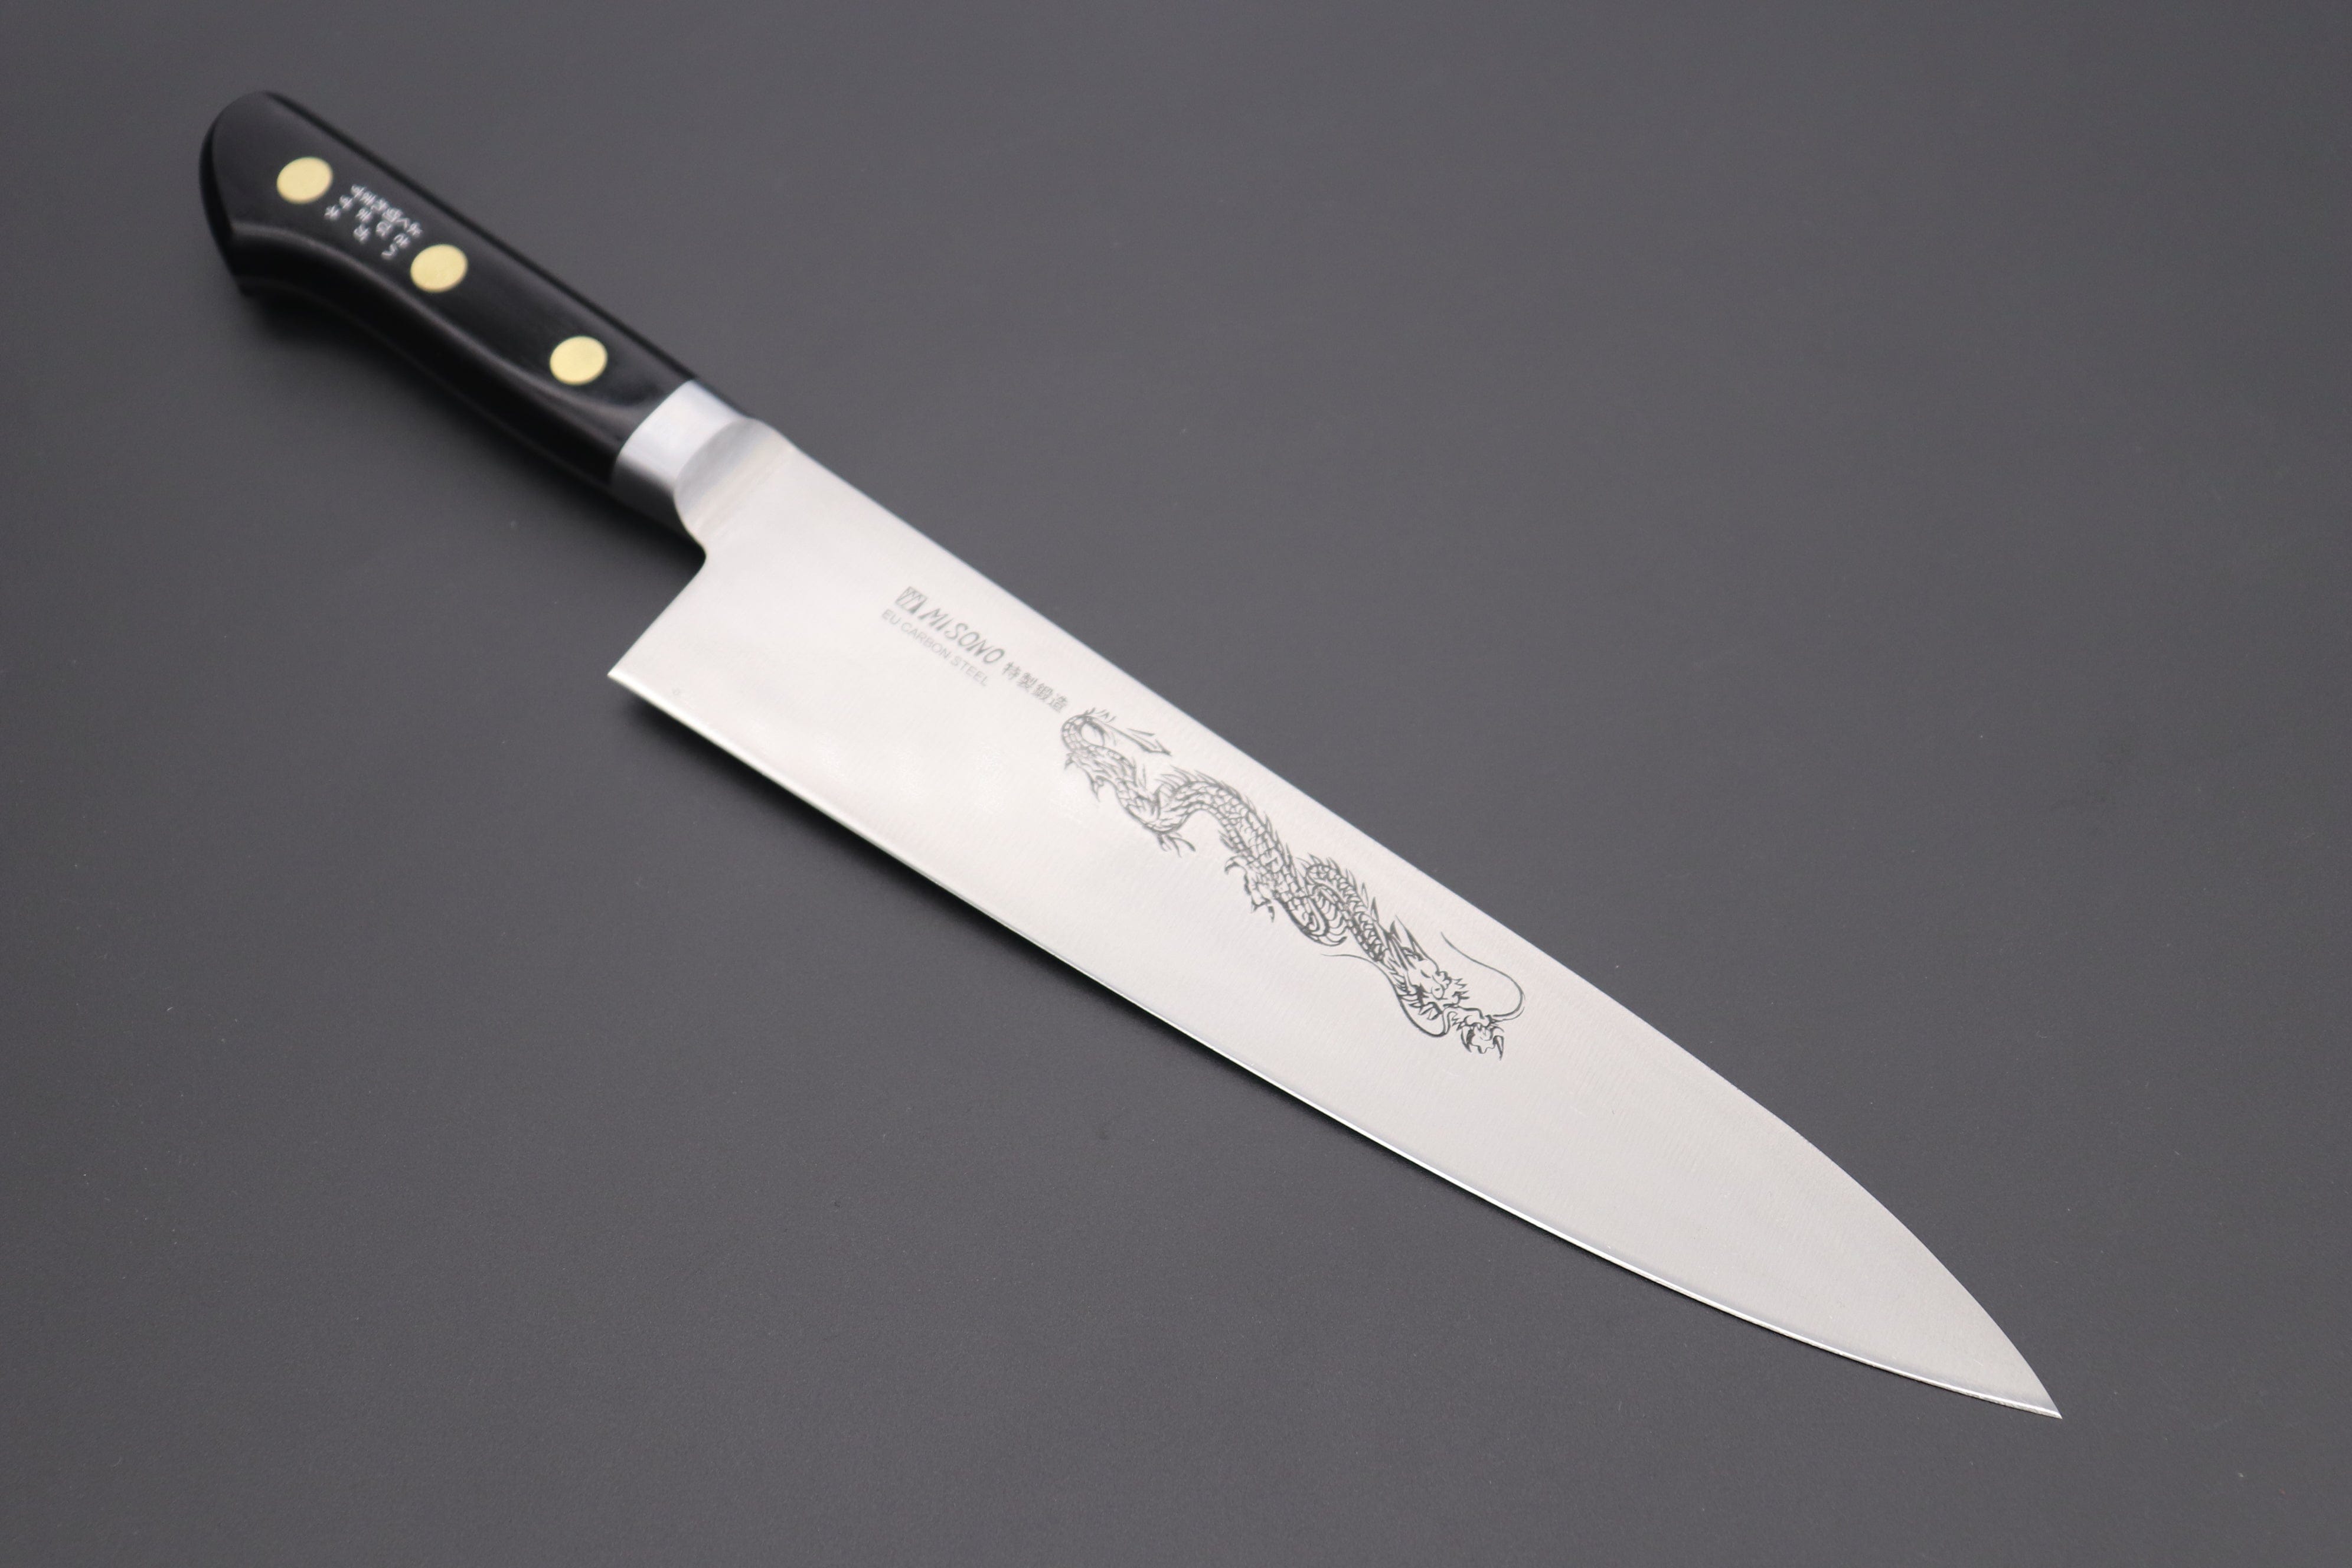  Commercial CHEF Knife Japanese 8 inch High Carbon